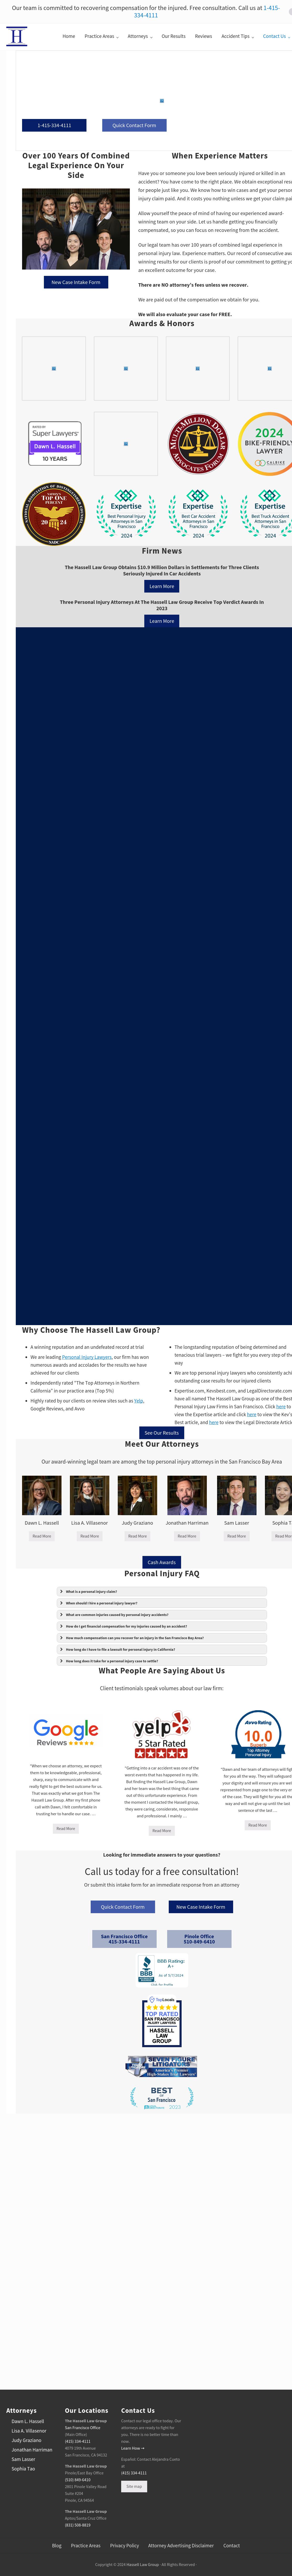 The Hassell Law Group - San Francisco CA Lawyers